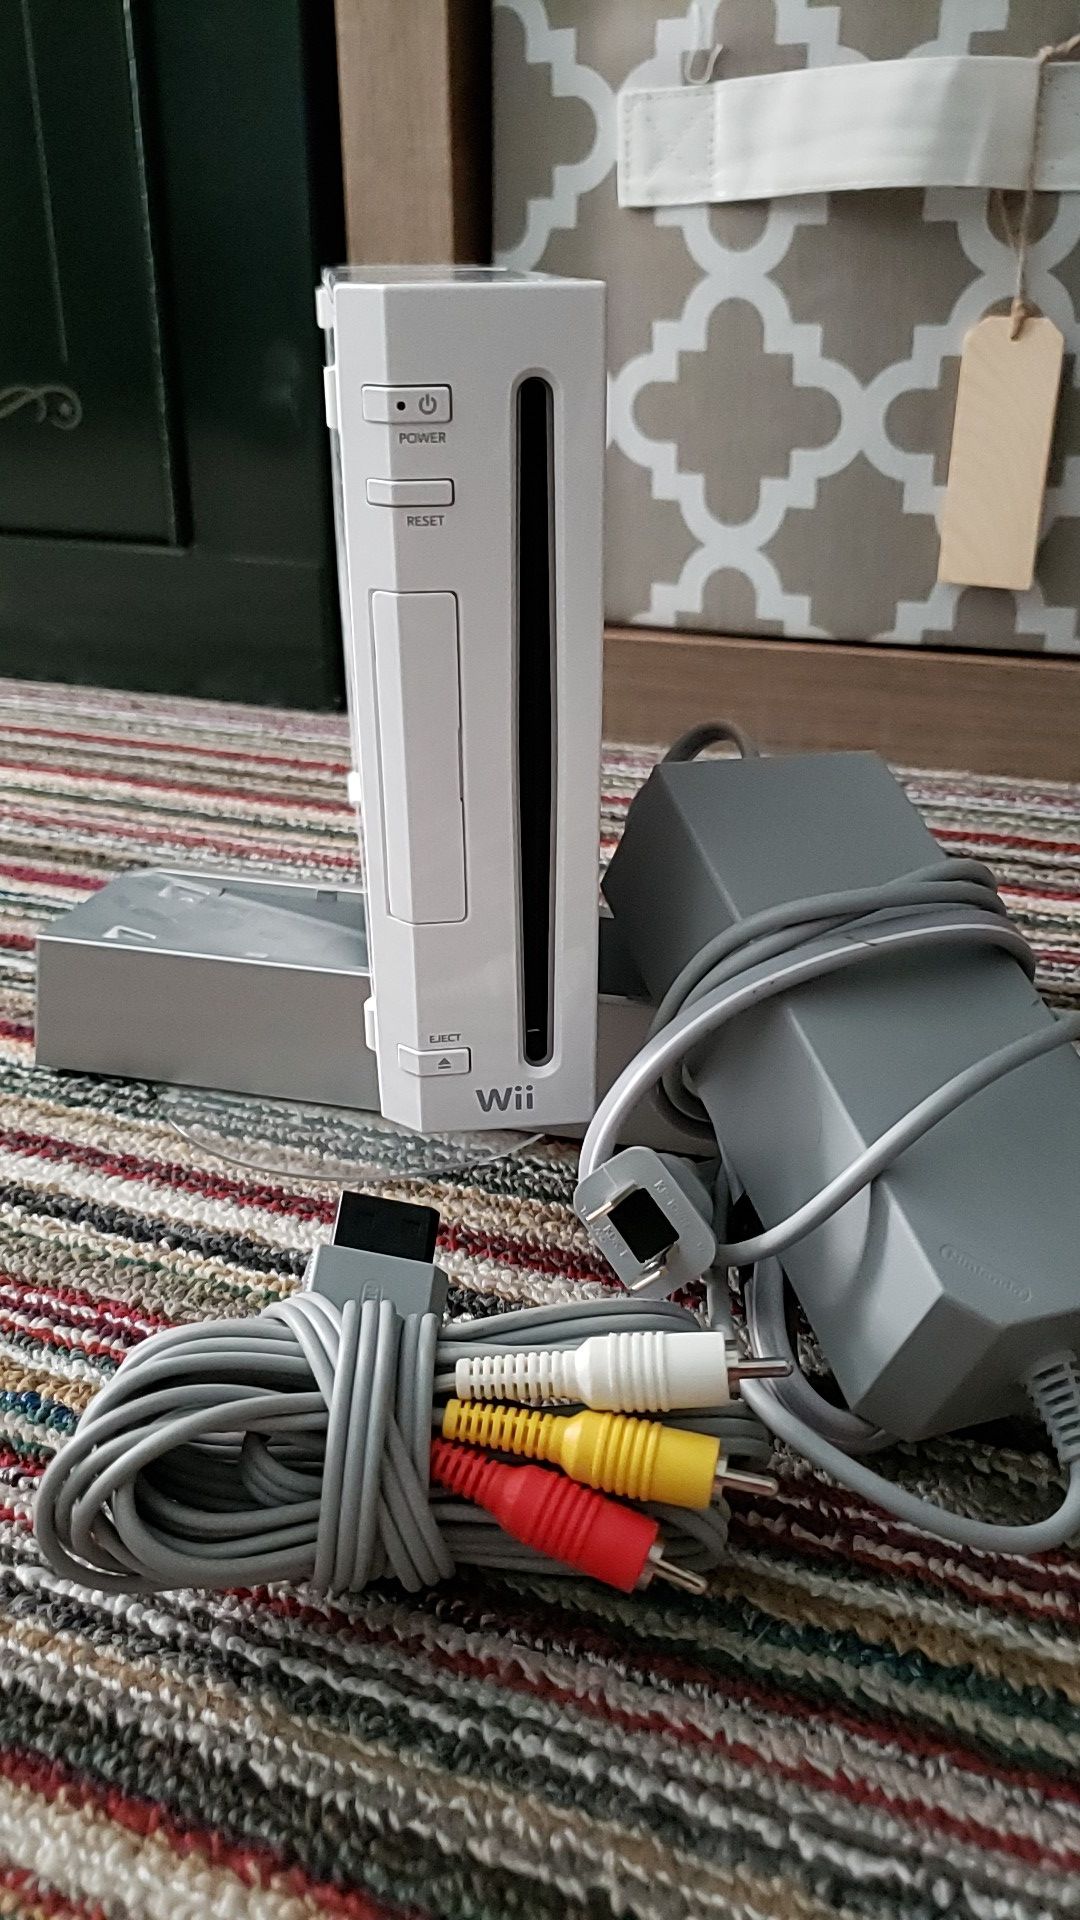 Wii console with stand, plug, and adapters